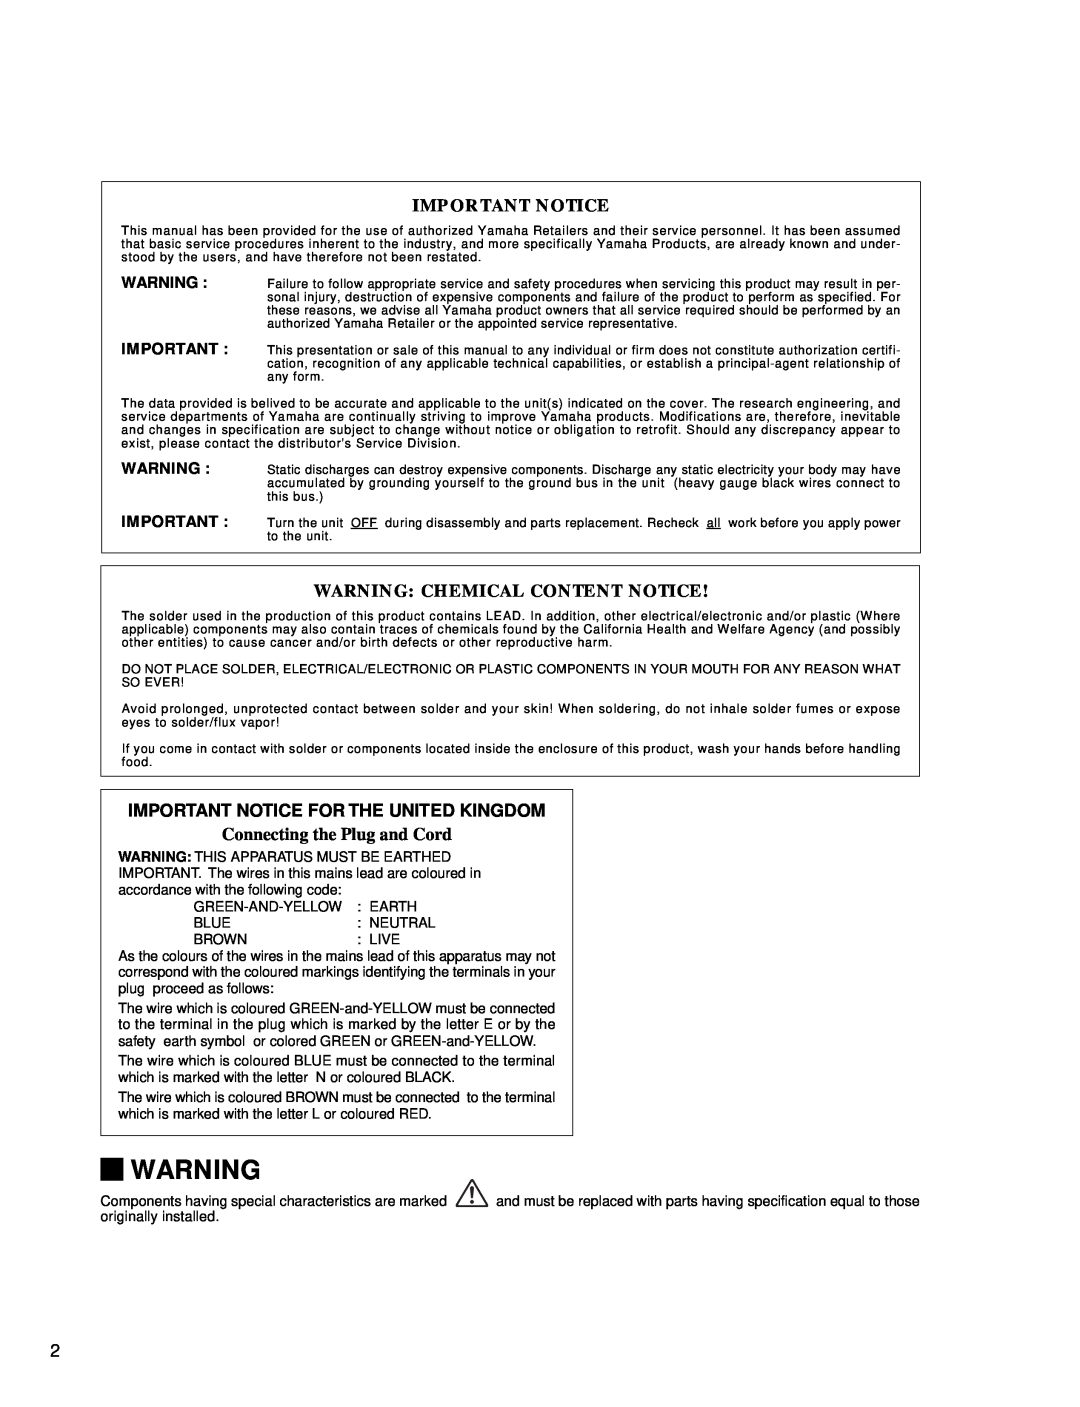 Yamaha DS60-112 Warning Chemical Content Notice, Important Notice For The United Kingdom, Connecting the Plug and Cord 